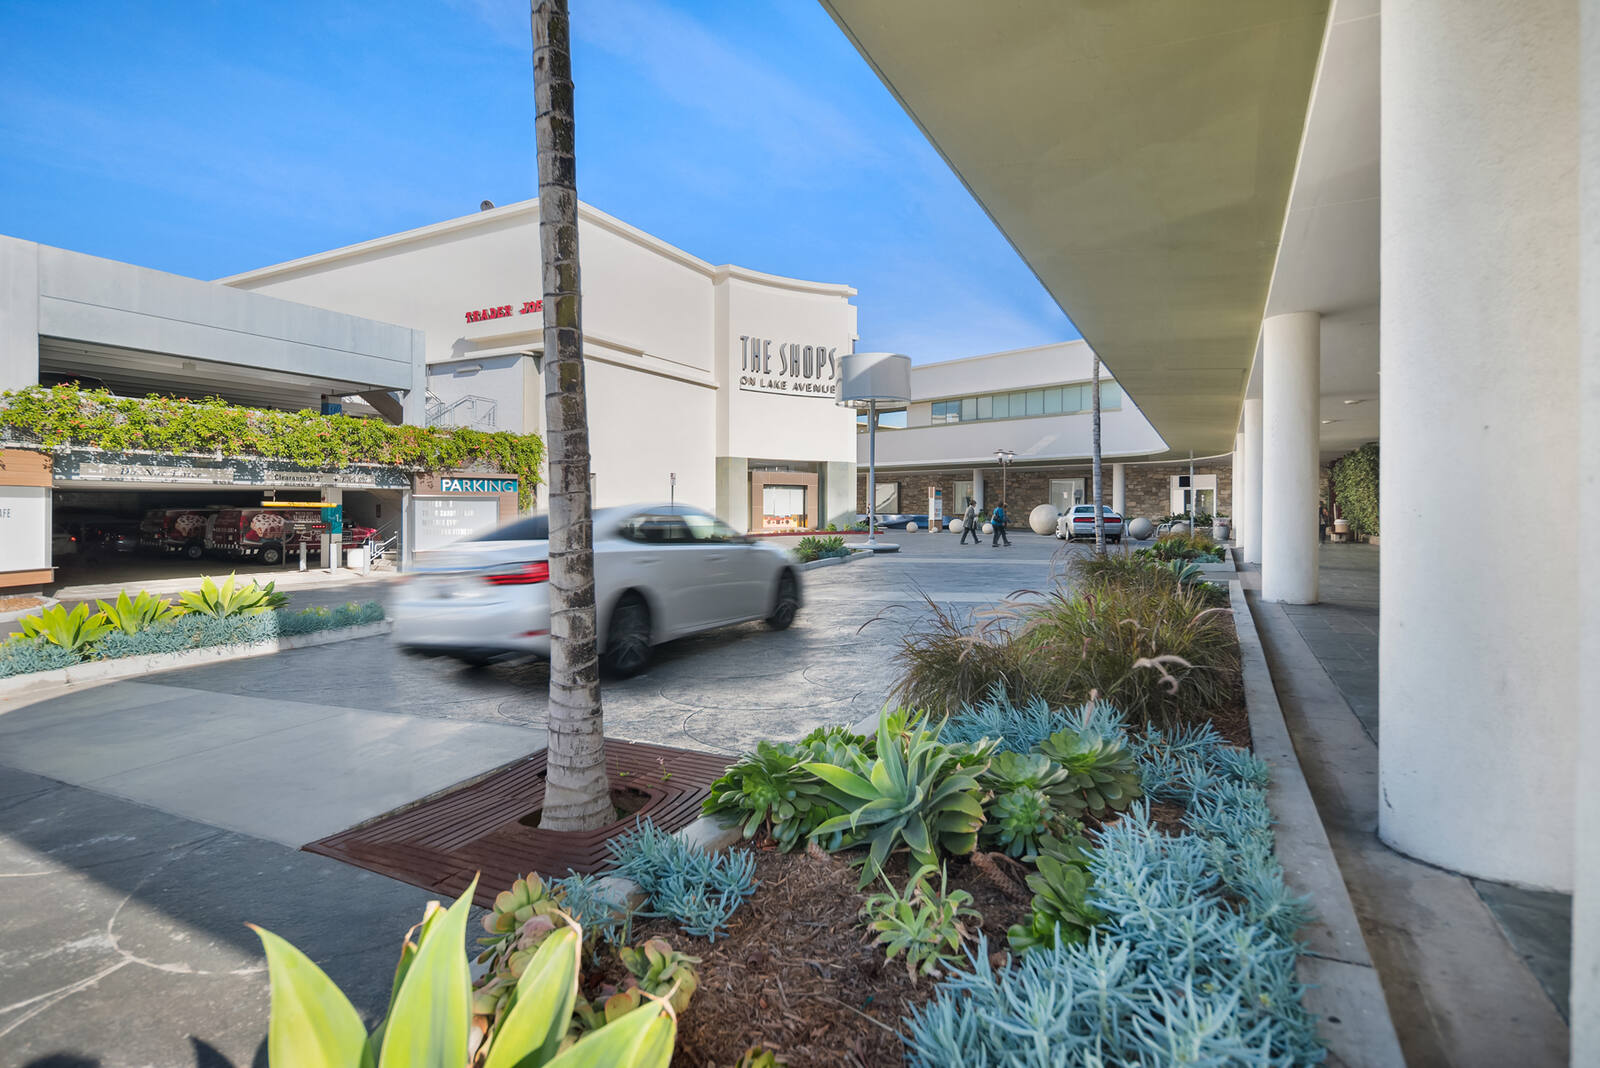 Pasadena, California CA - Available Retail Space & Restaurant Space for  Lease The Shops on Lake Avenue